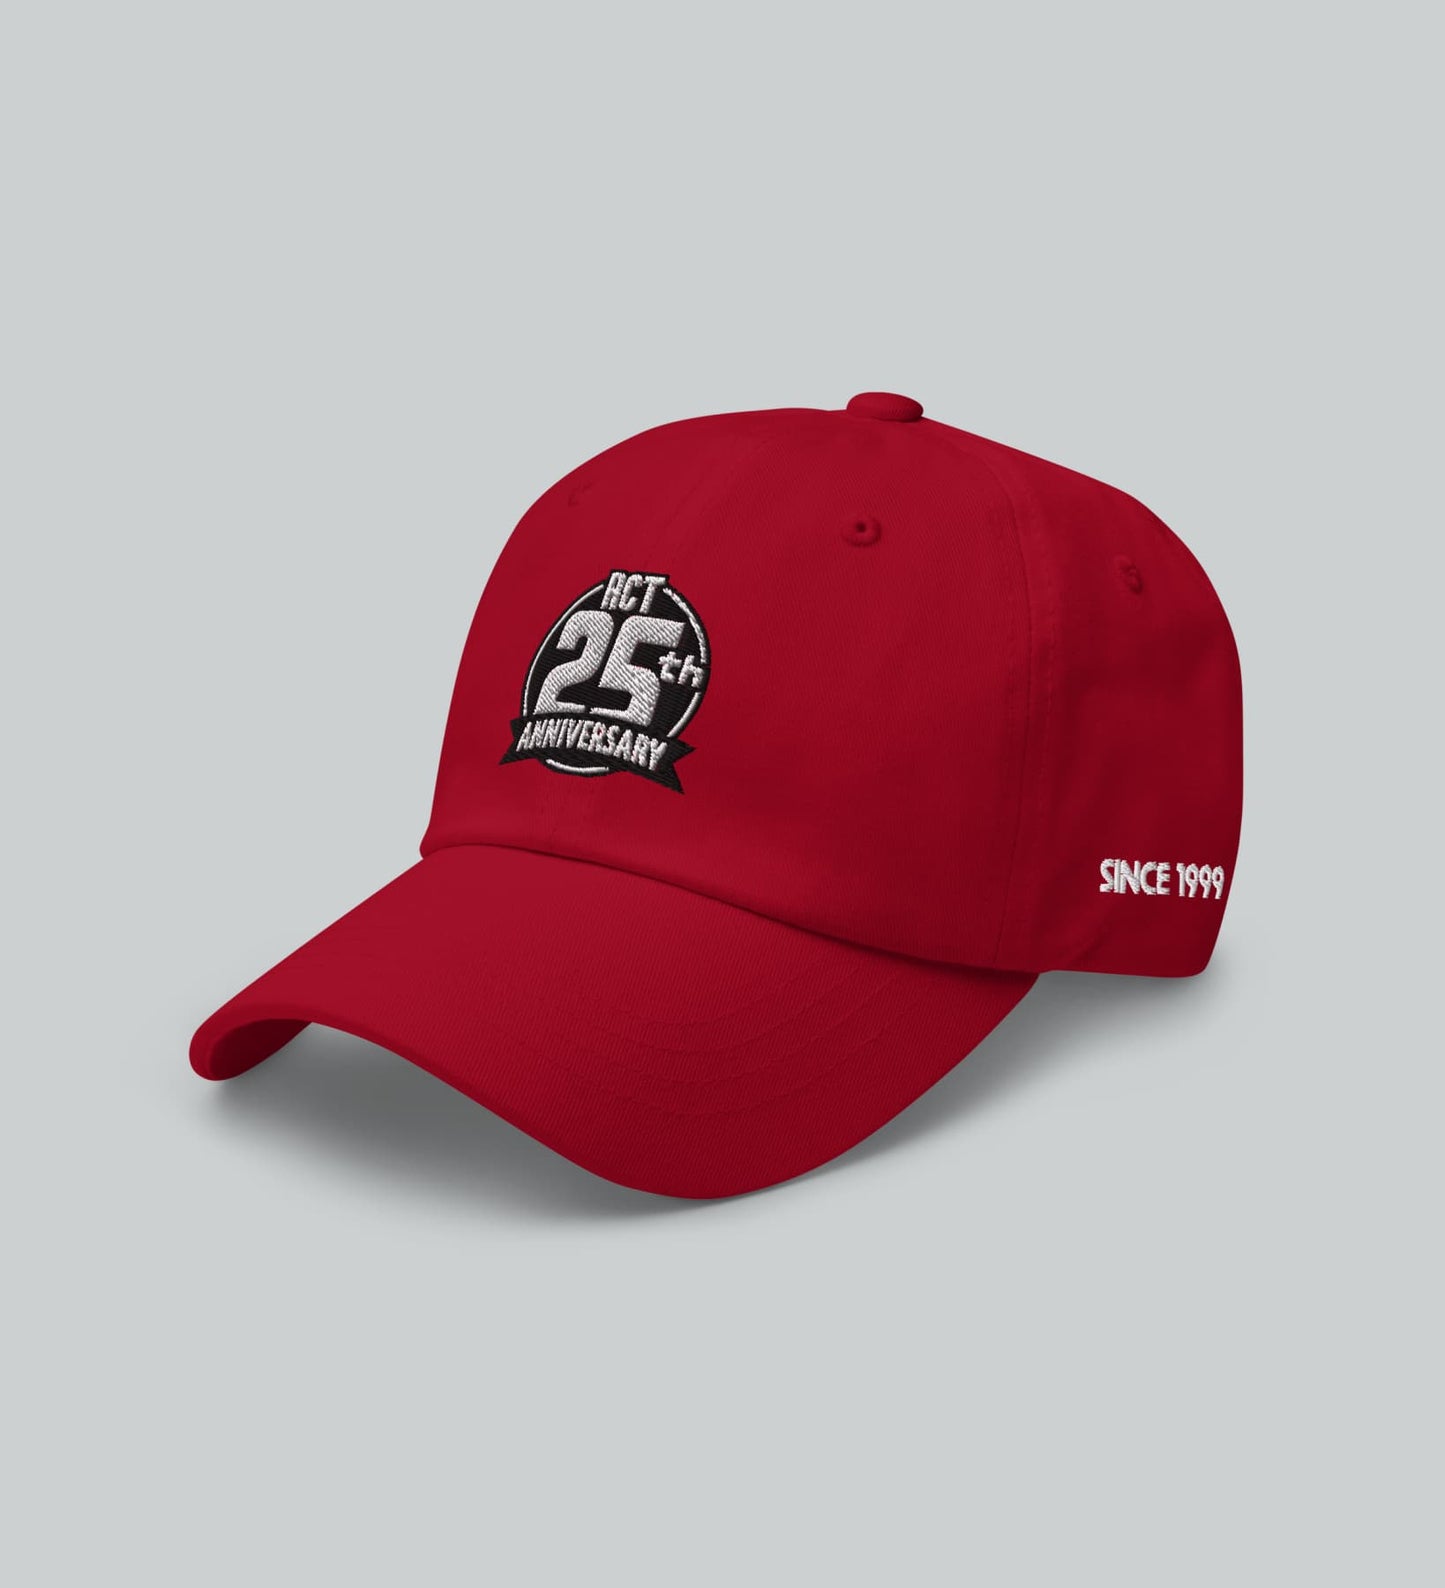 RCT 25th Anniversary Dad Hat